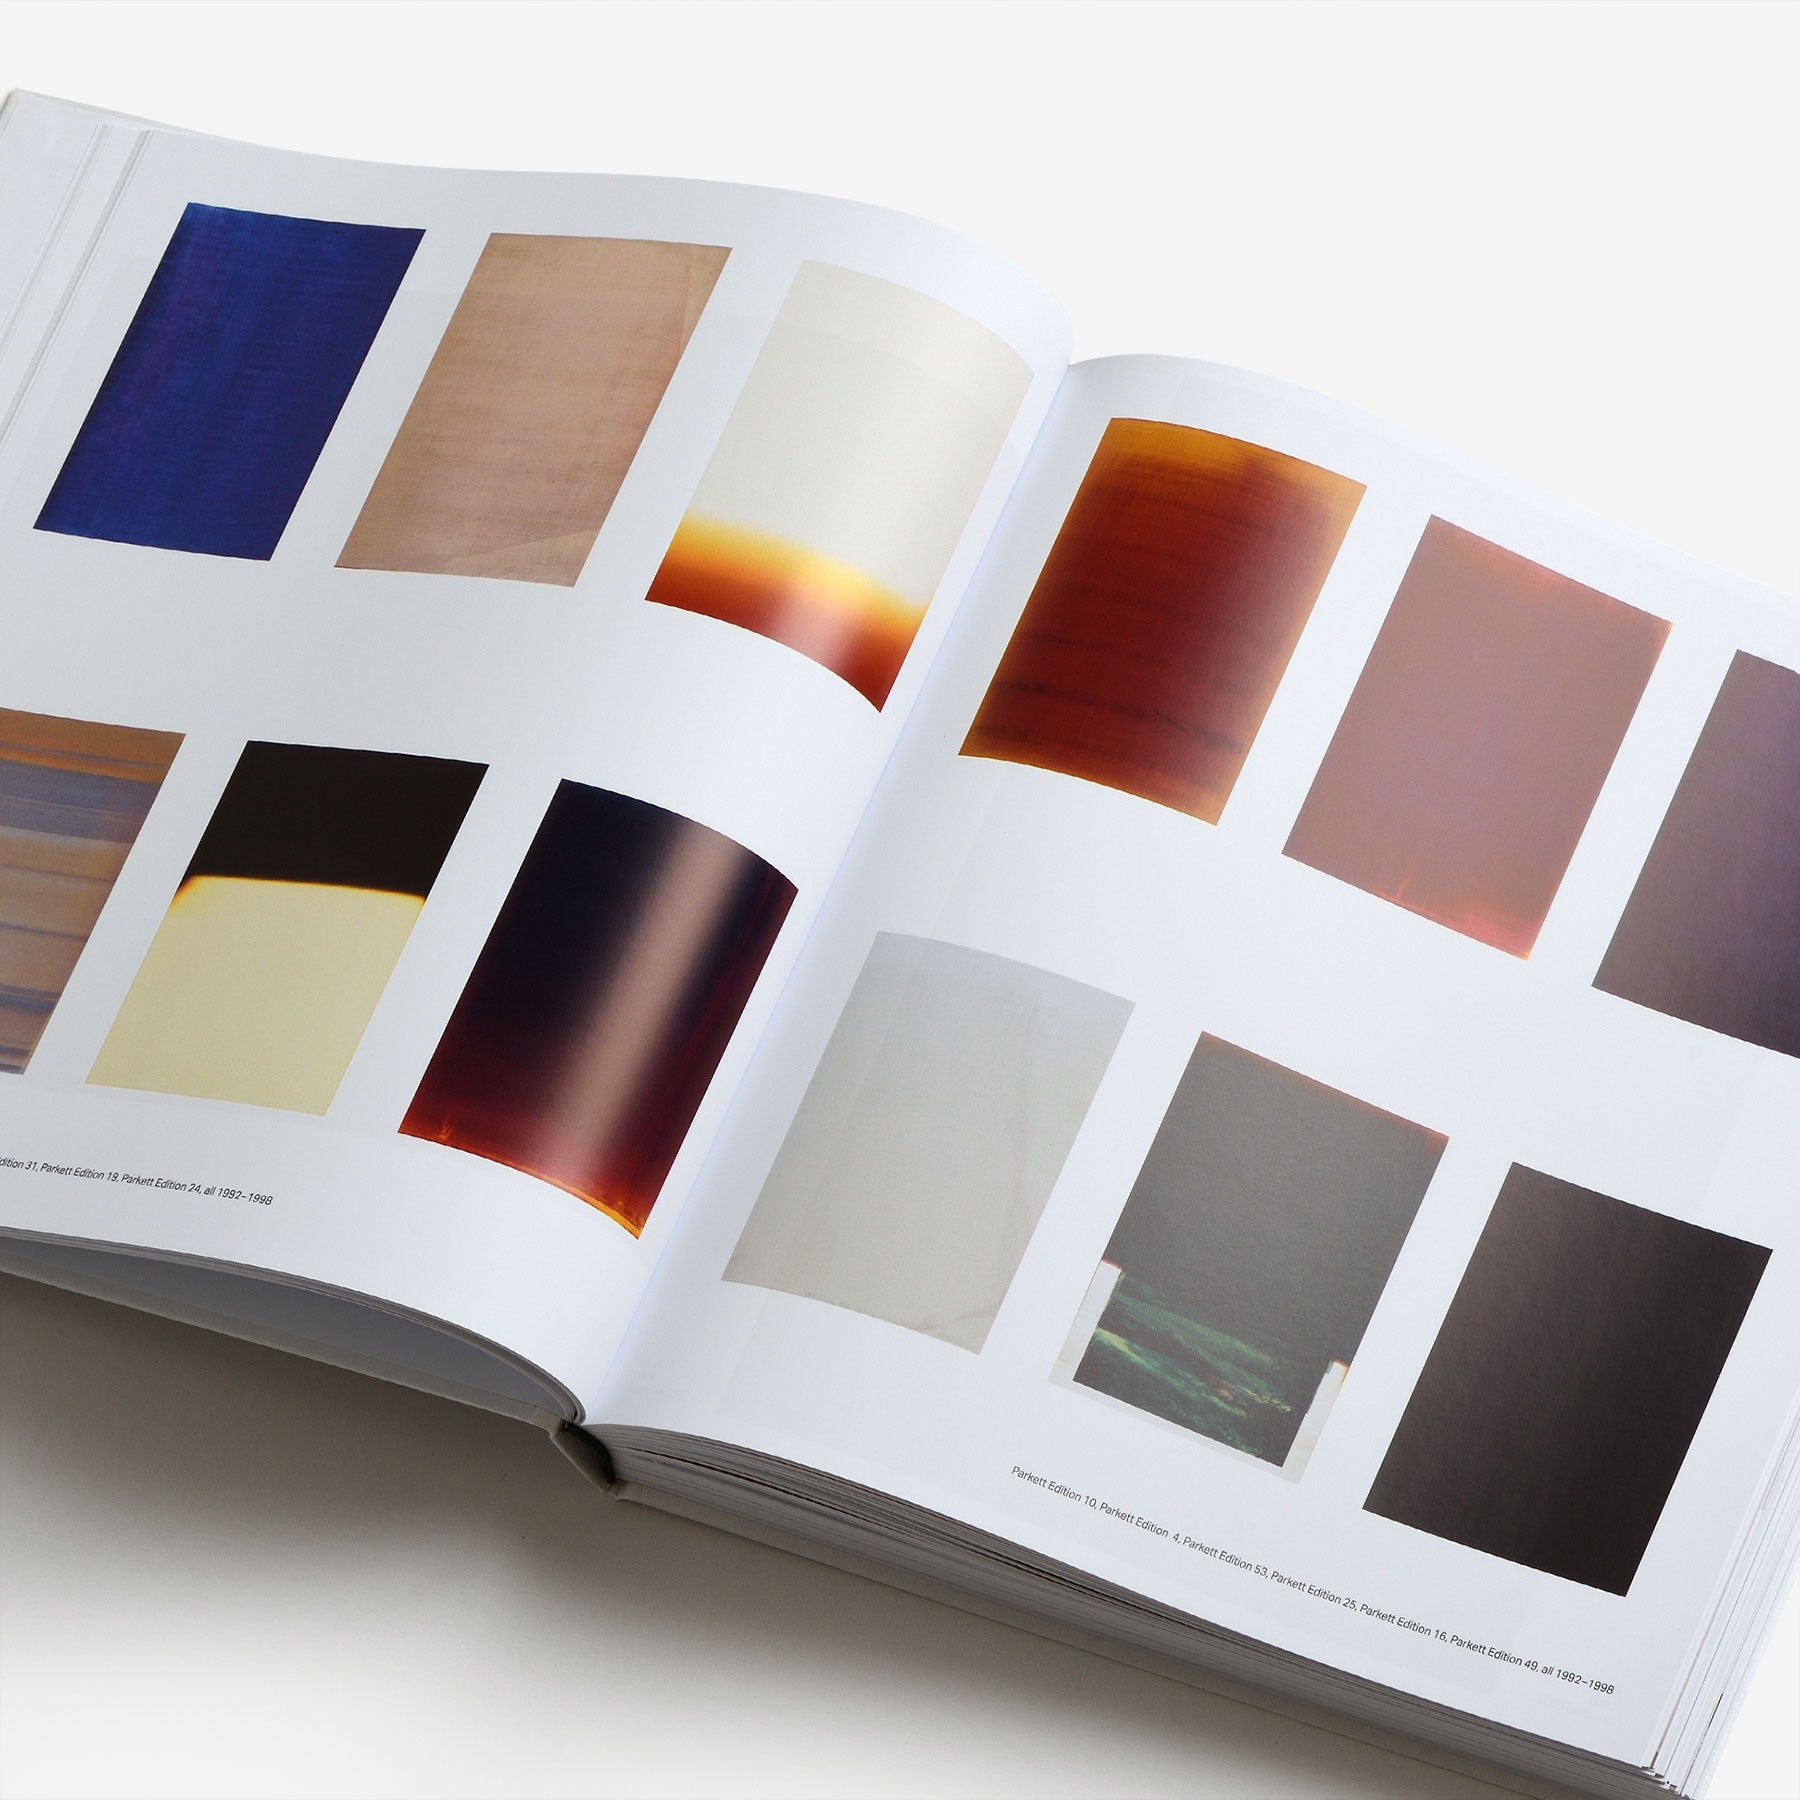 Wolfgang Tillmans: Saturated Light | North East